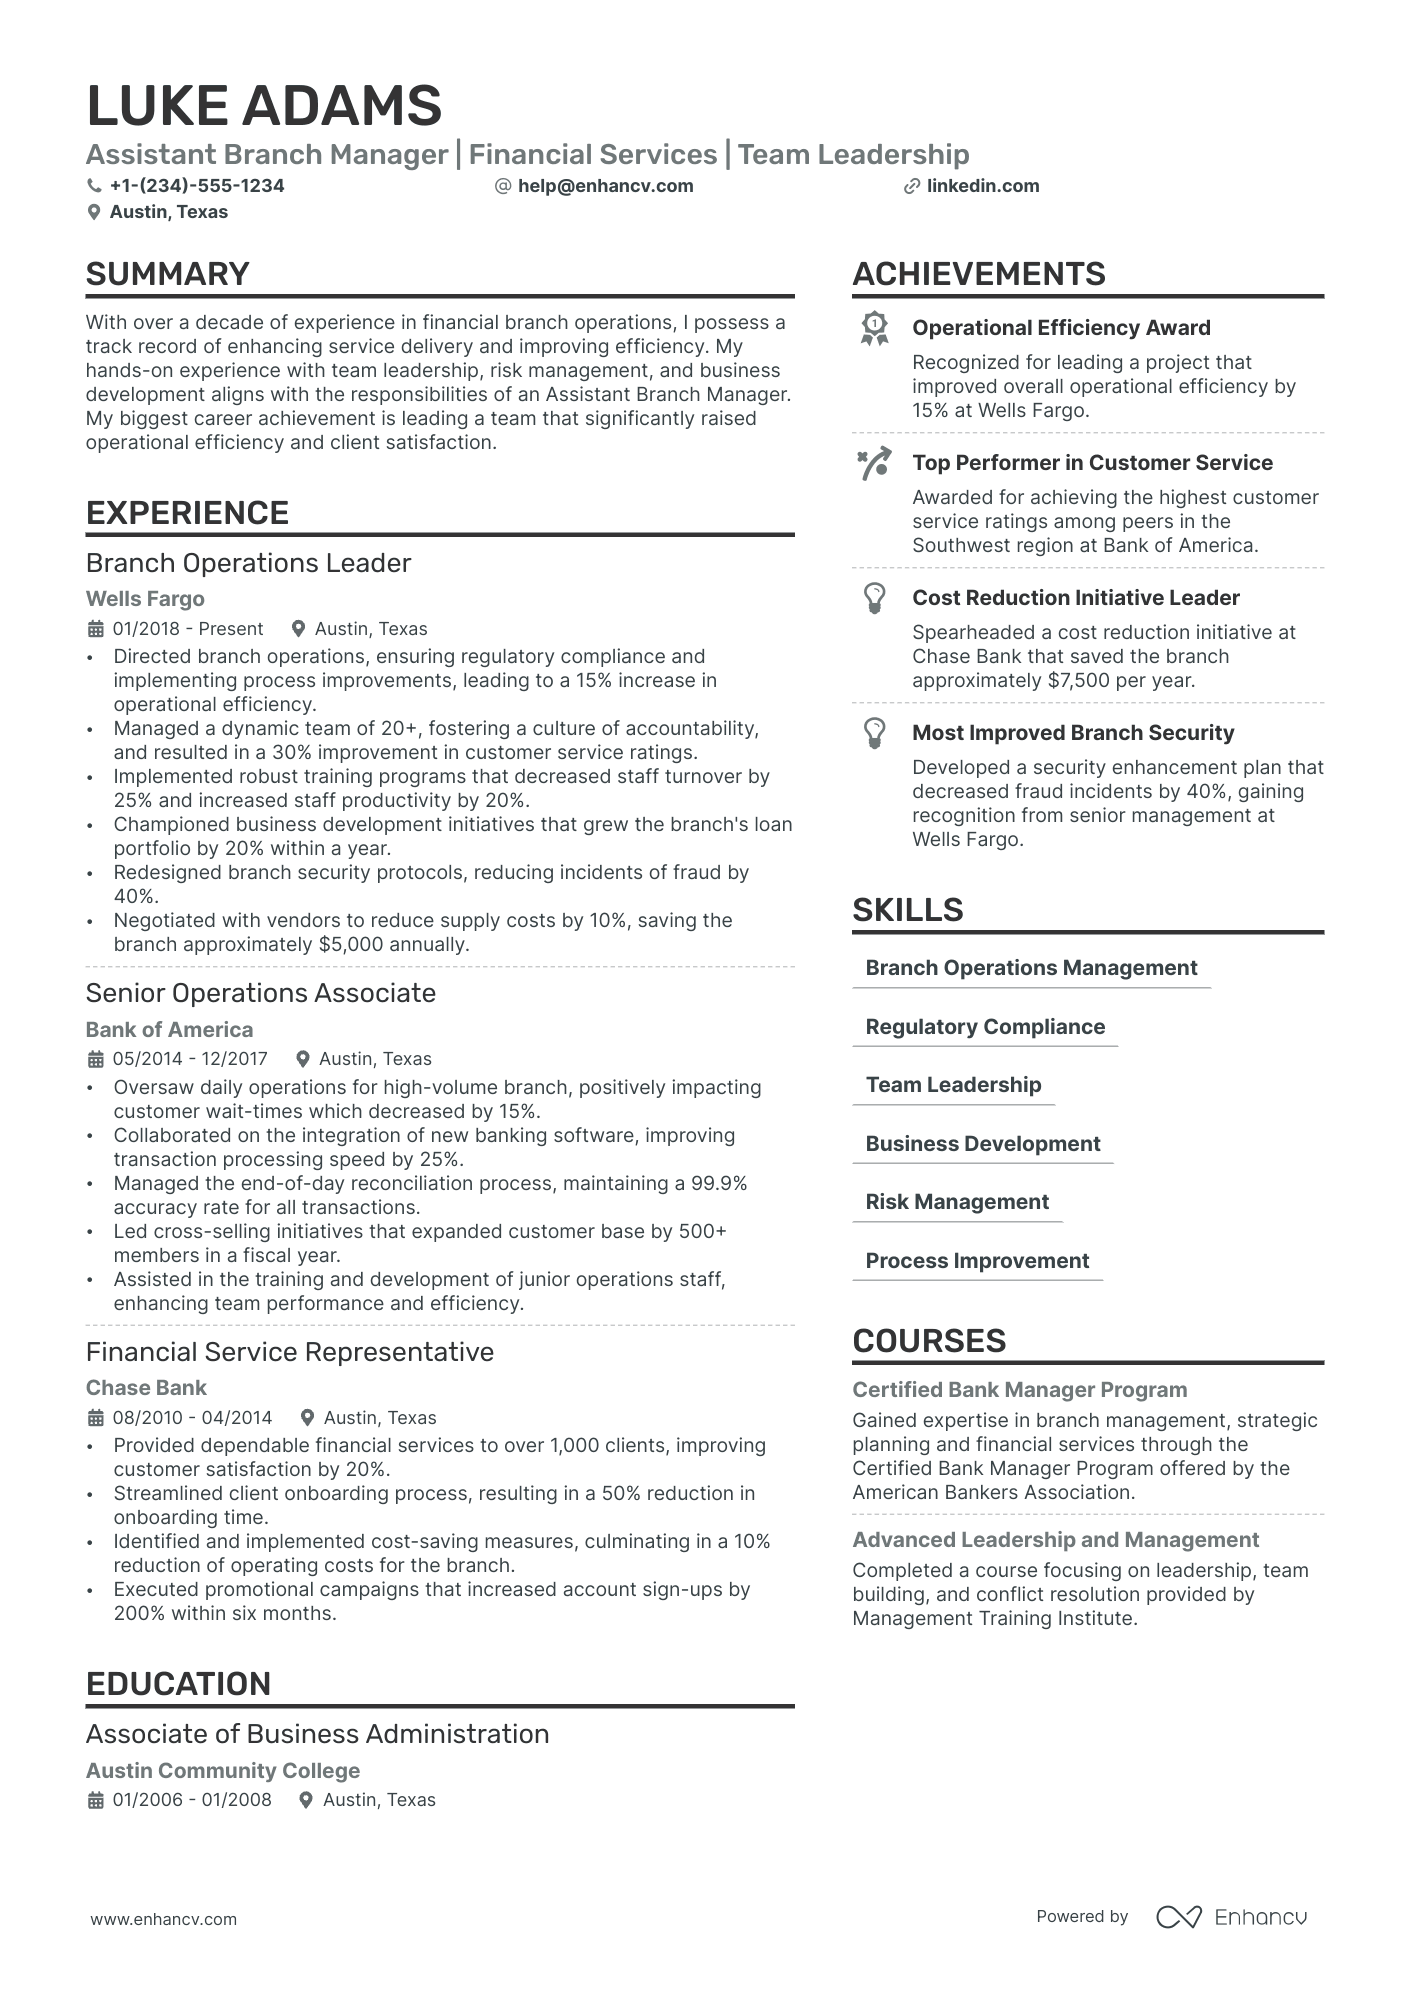 Assistant Branch Manager resume example